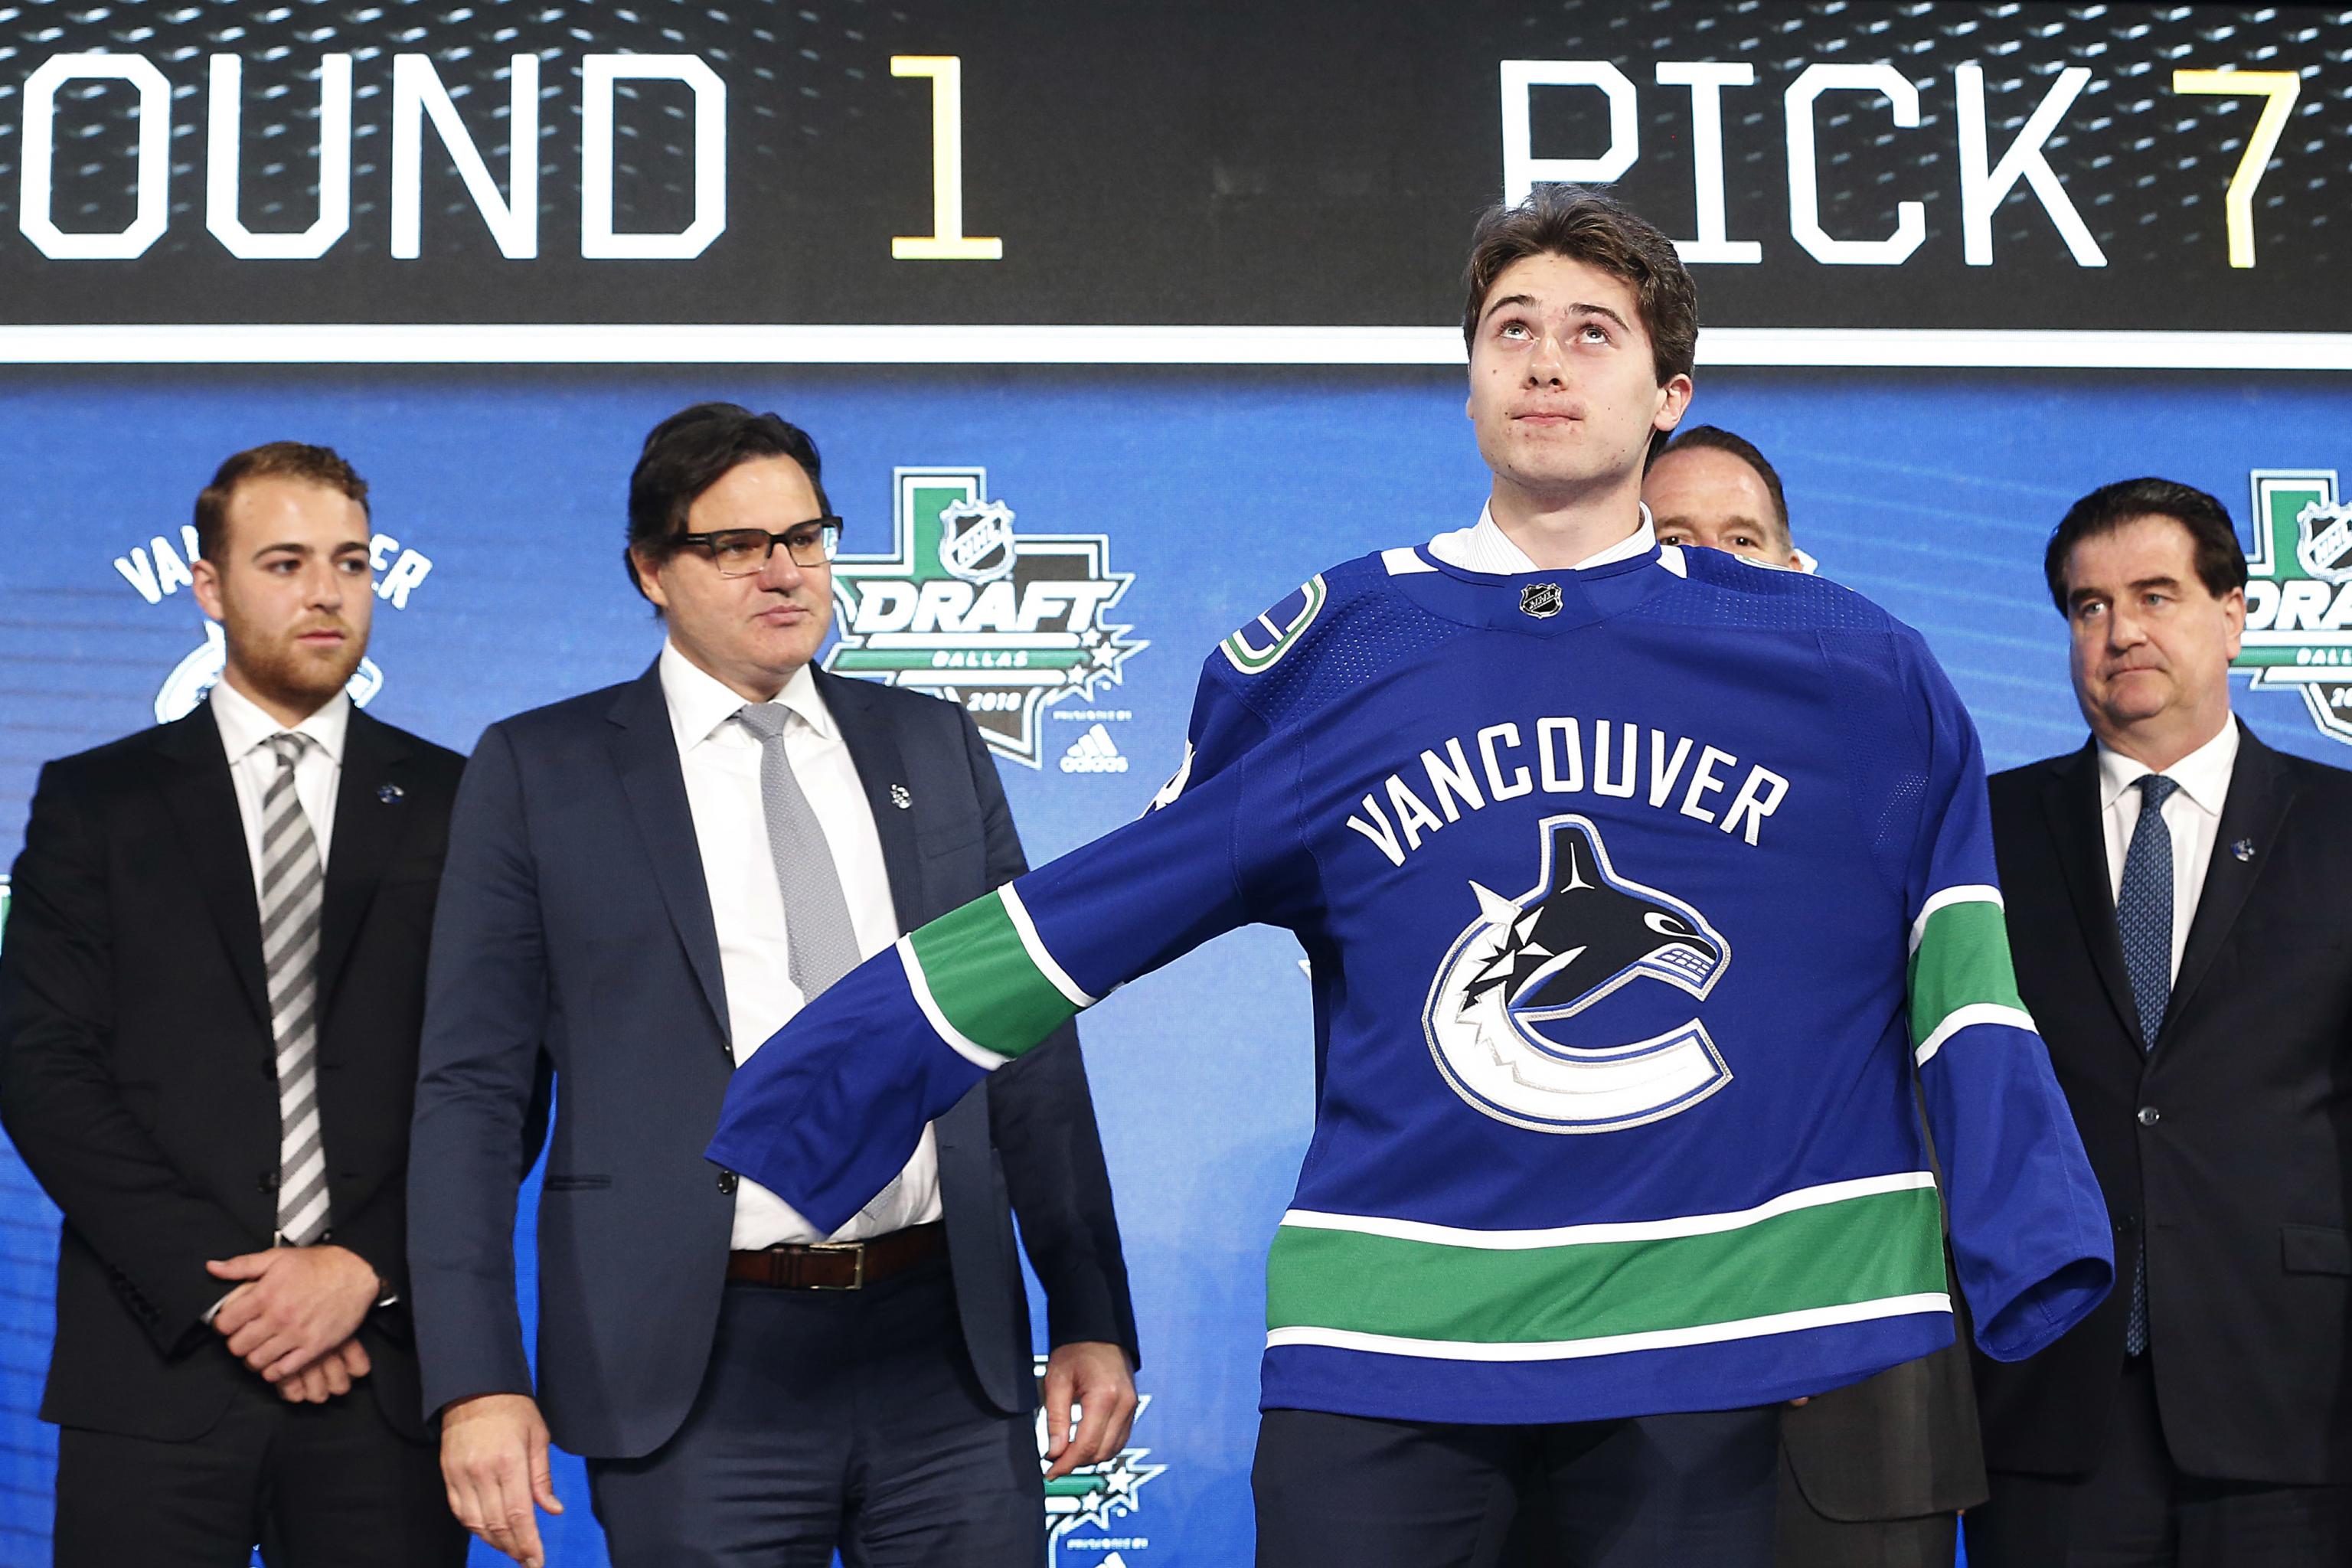 Canucks: Every jersey in franchise history from worst to best - Page 2